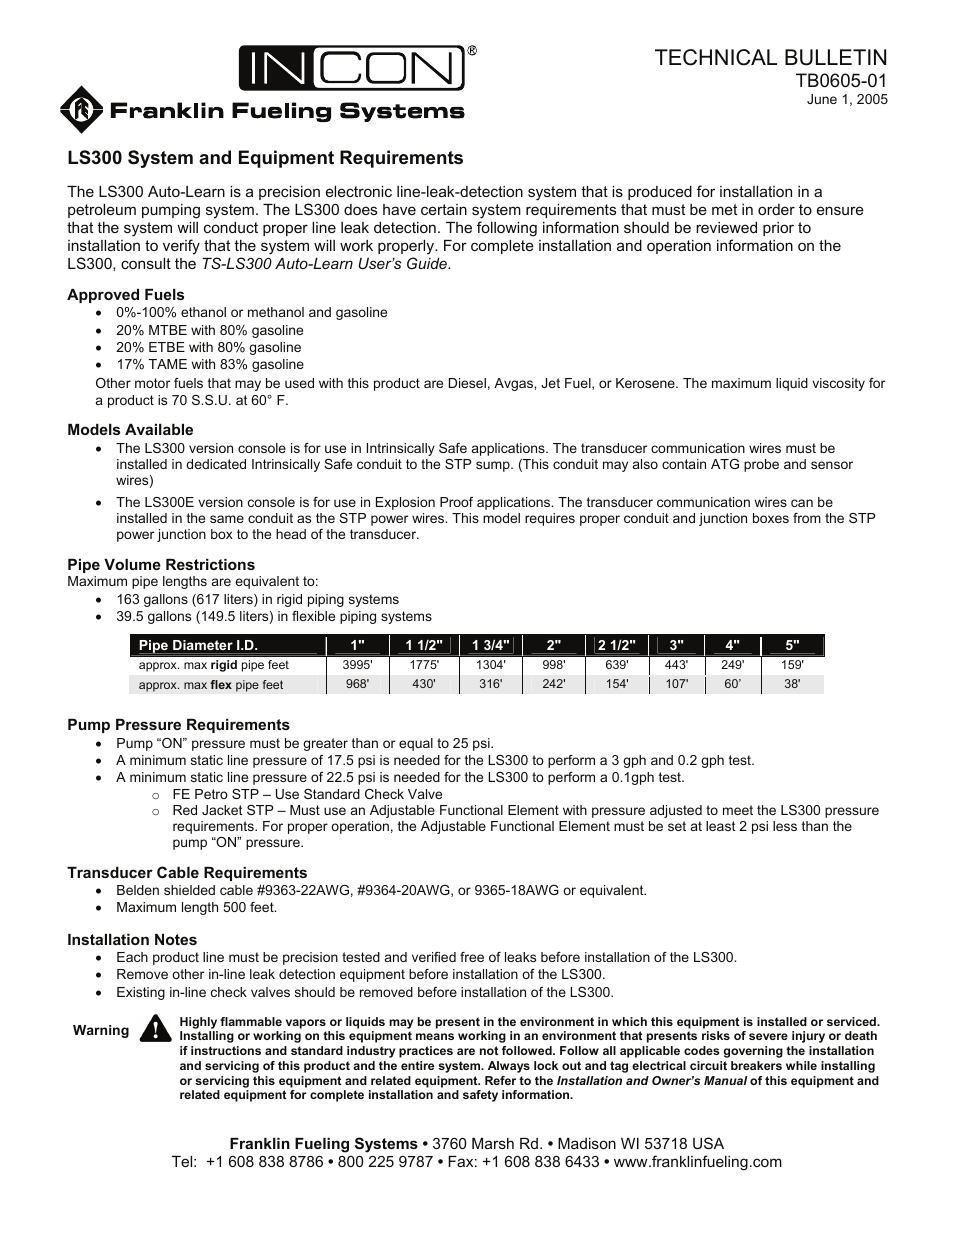 TS-LS300 System and Equipment Requirements